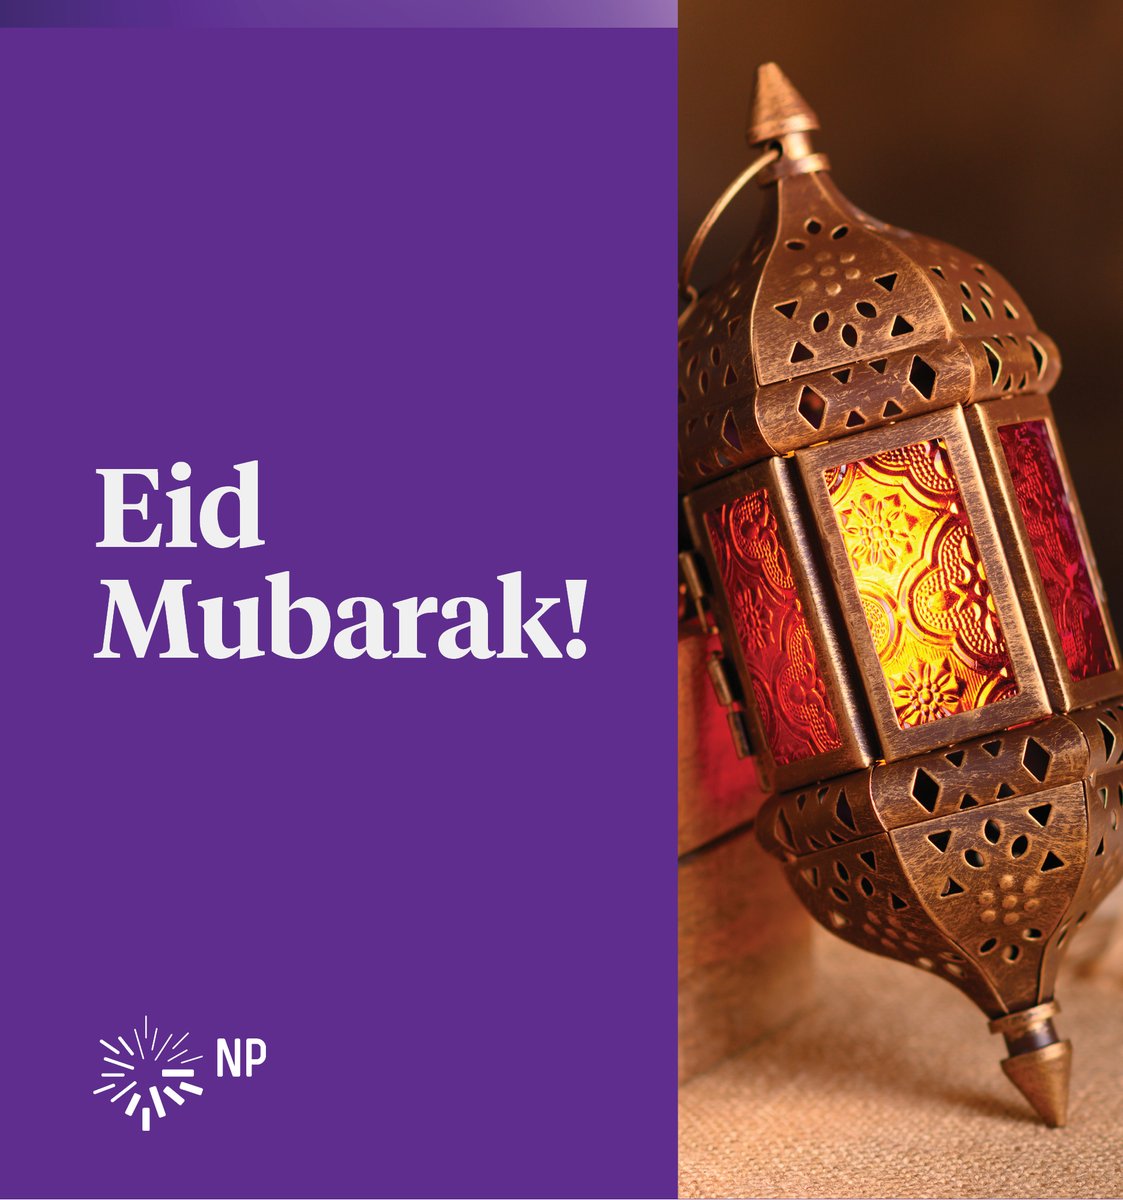 Eid Mubarak! May the magic of this Eid bring happiness, peace, and prosperity to your life.